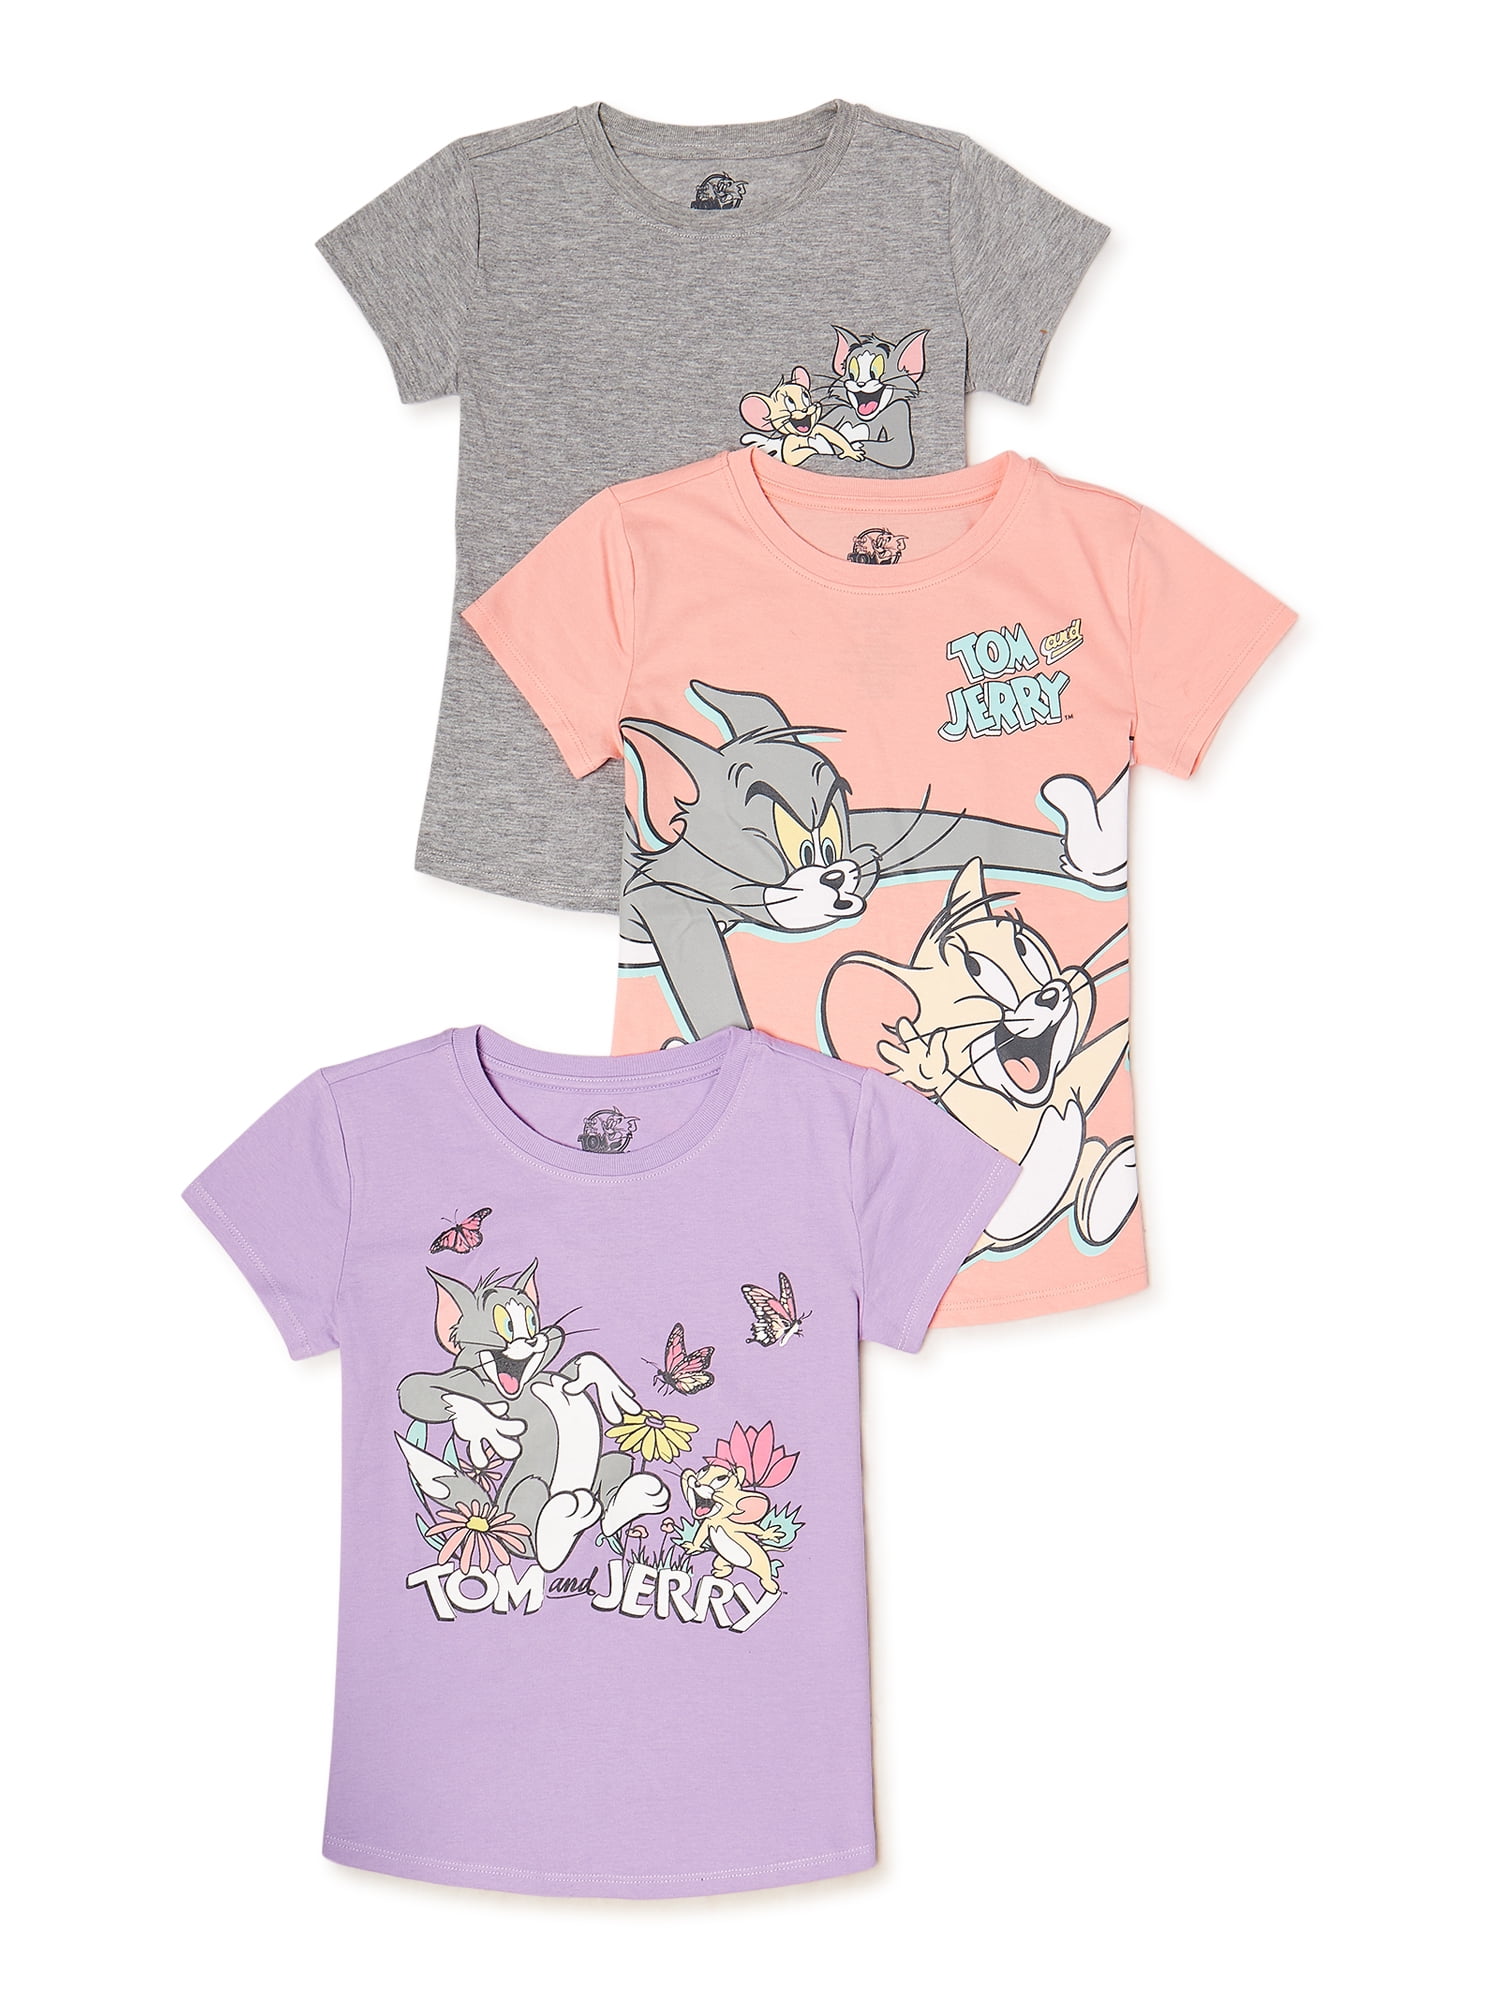 T-Shirts, Sizes 4-18 Girls\' & & Tom 3-Pack, Jerry Graphic Plus